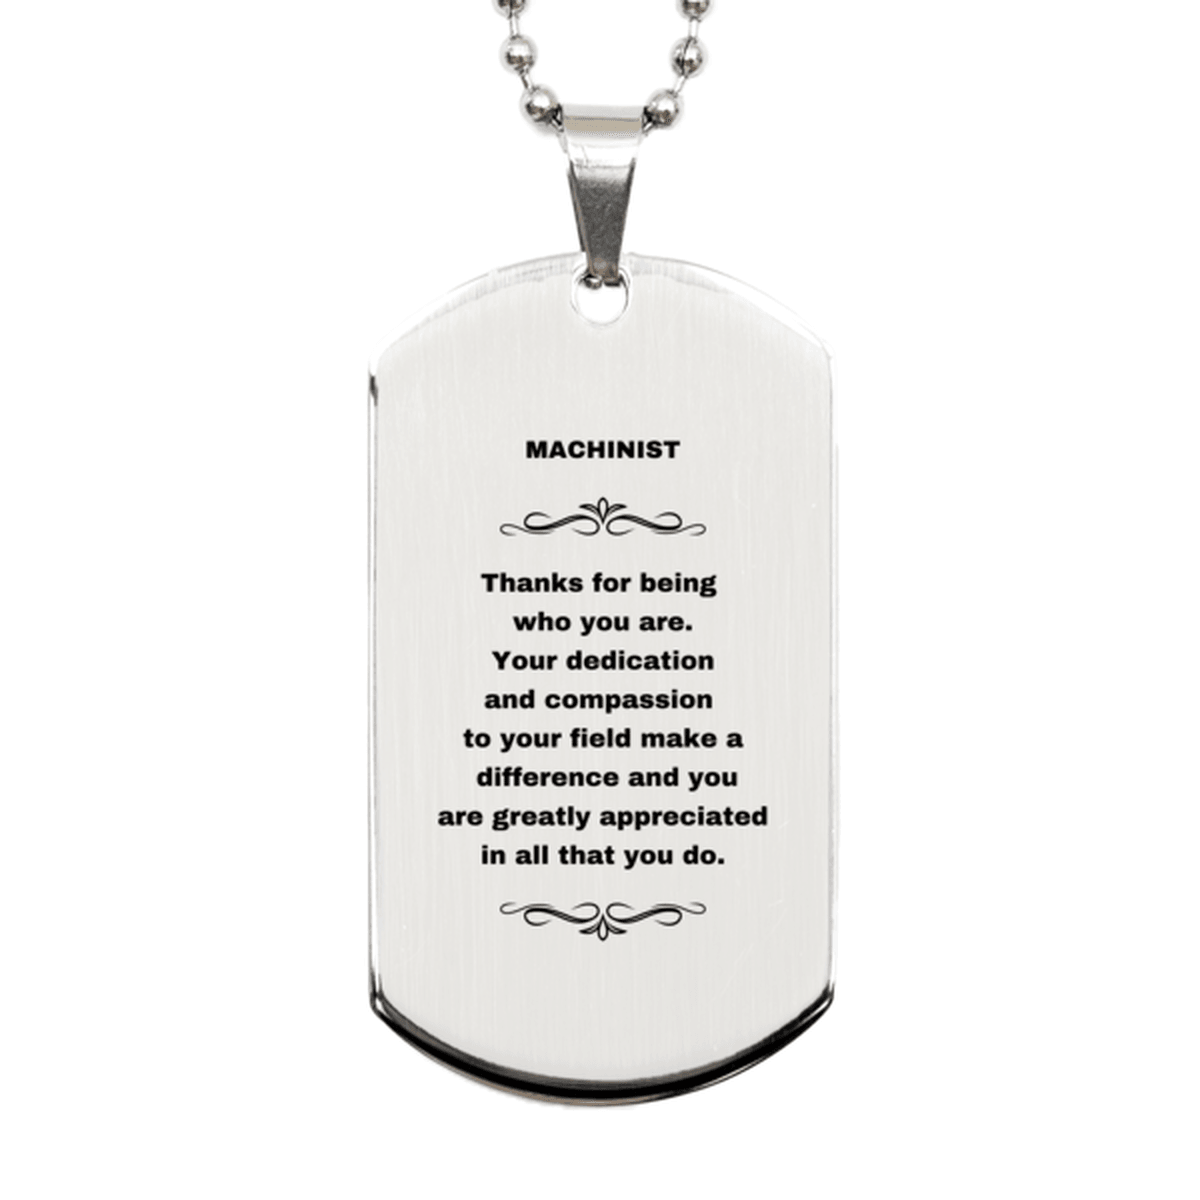 Machinist Silver Dog Tag Necklace - Thanks for being who you are - Birthday Christmas Jewelry Gifts Coworkers Colleague Boss - Mallard Moon Gift Shop